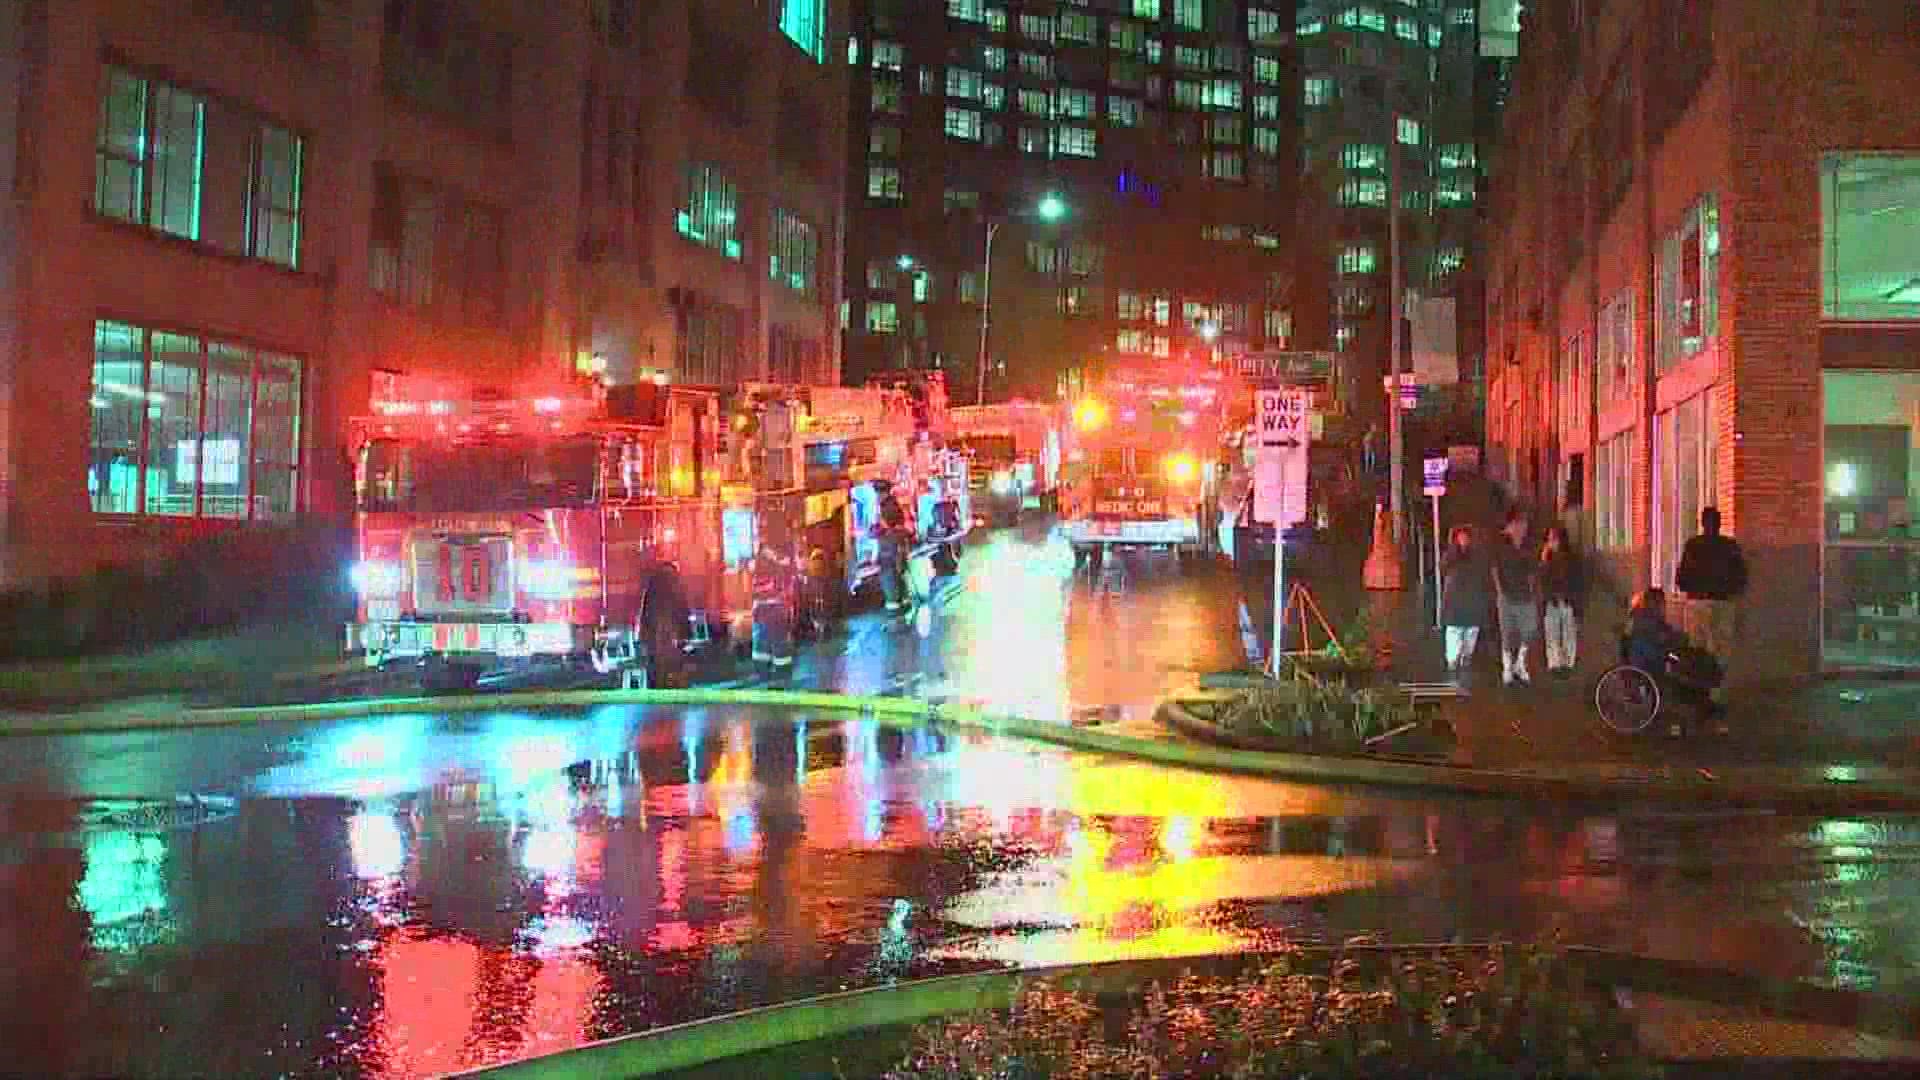 Seattle Fire Department crews were in South Lake Union Sunday morning after a fire broke out at an apartment building.